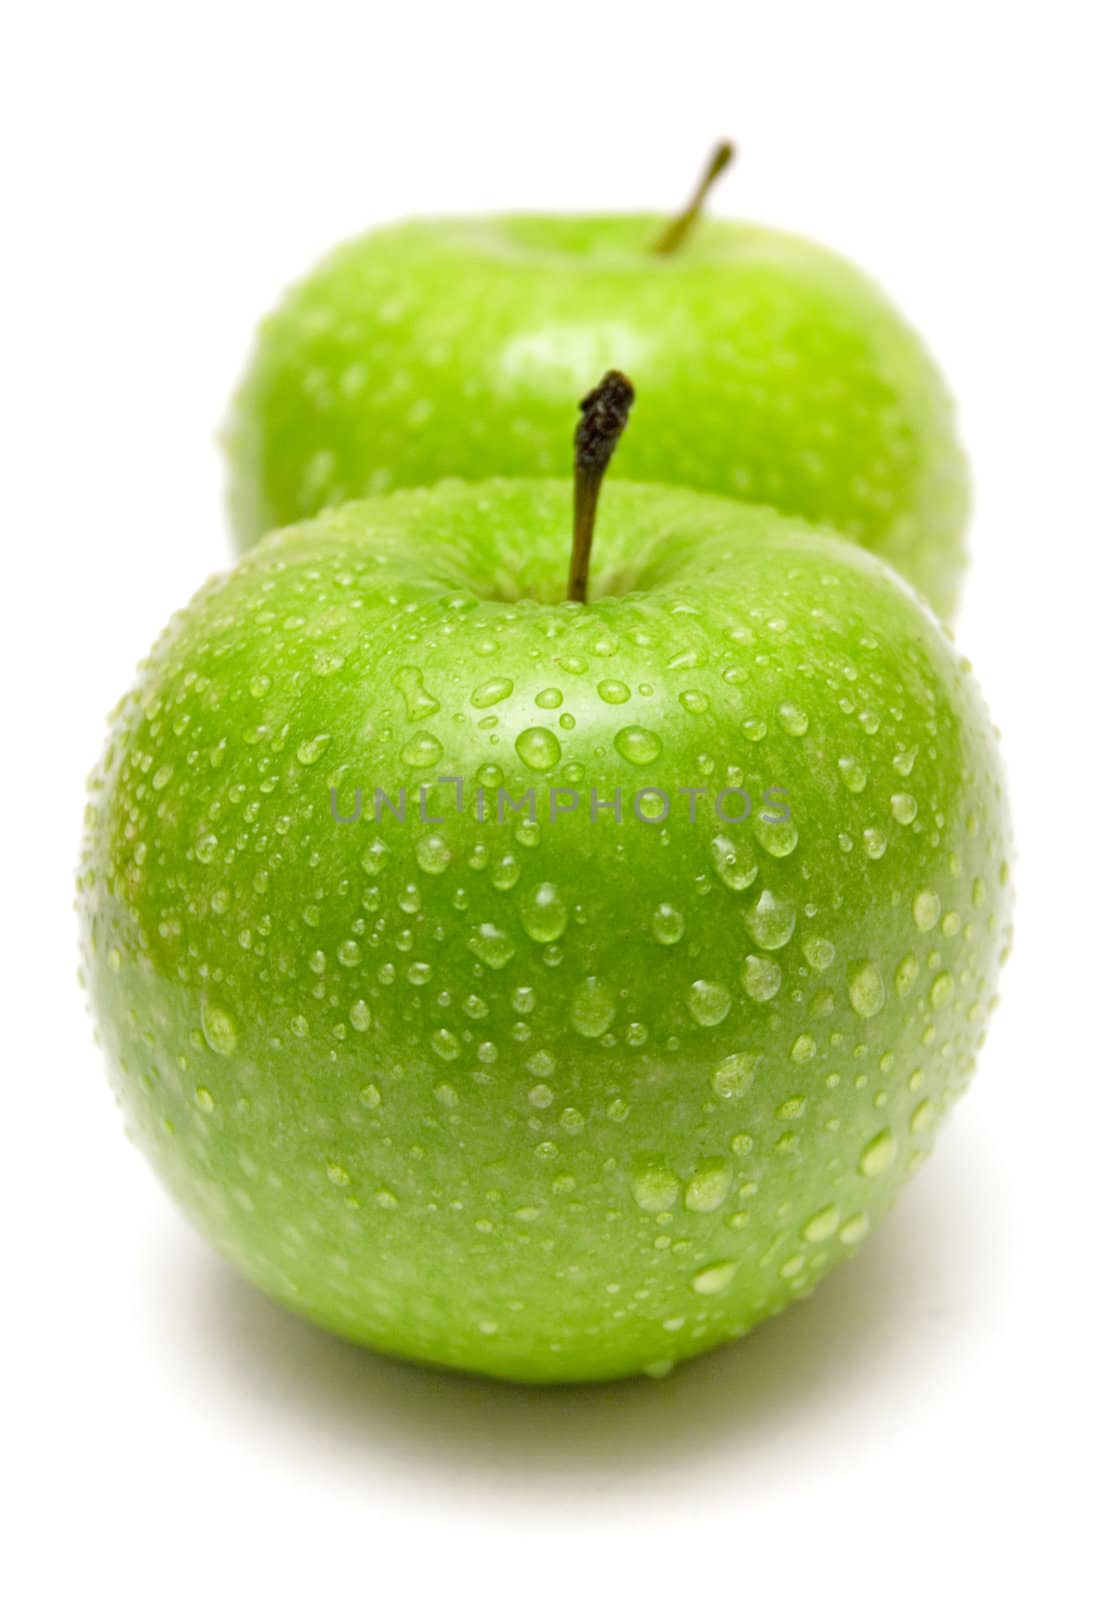 Two Green Apples in a Row by winterling